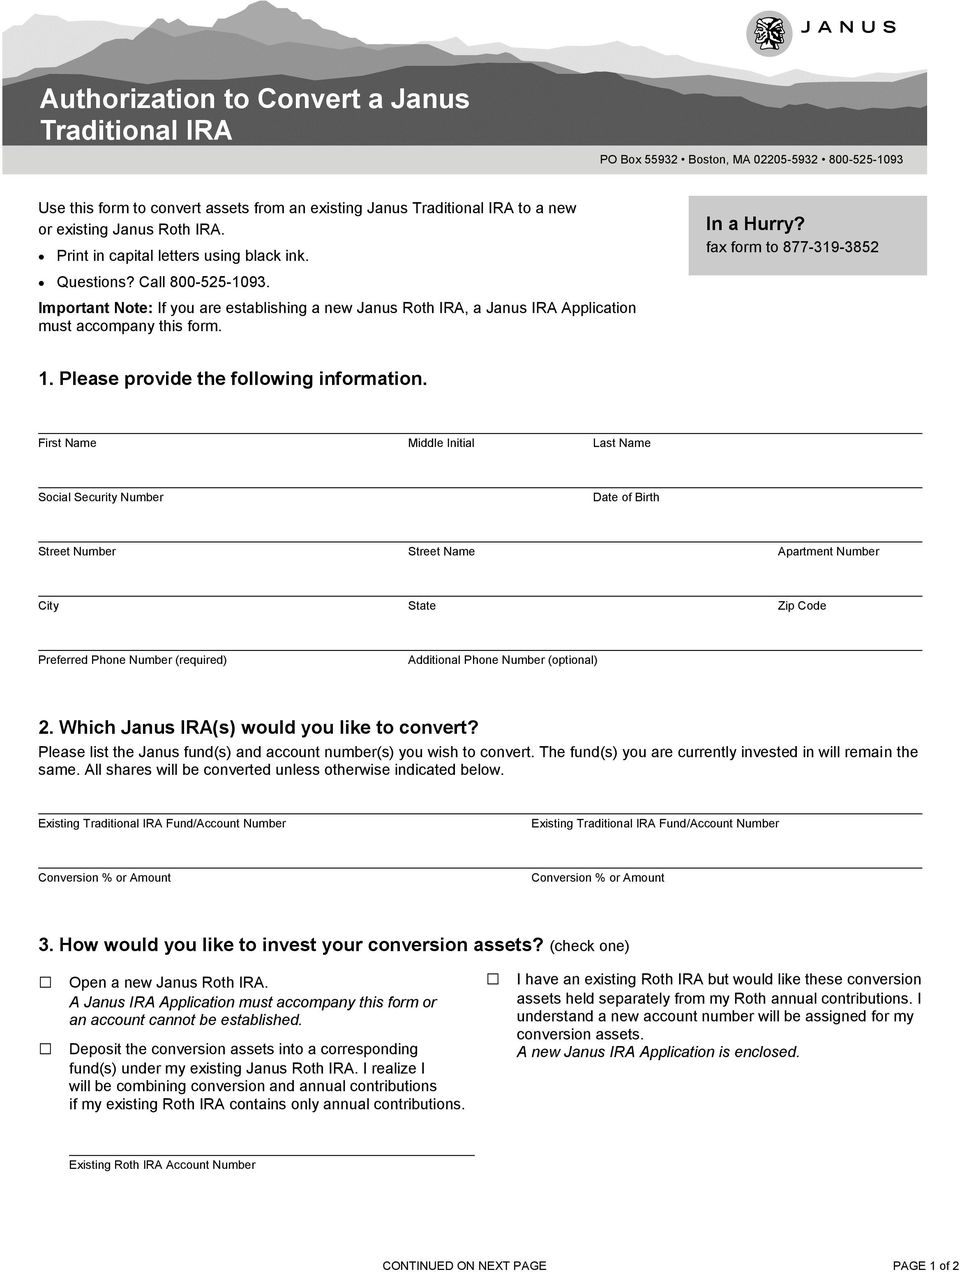 Important Note: If you are establishing a new Janus Roth IRA, a Janus IRA Application must accompany this form. 1. Please provide the following information.